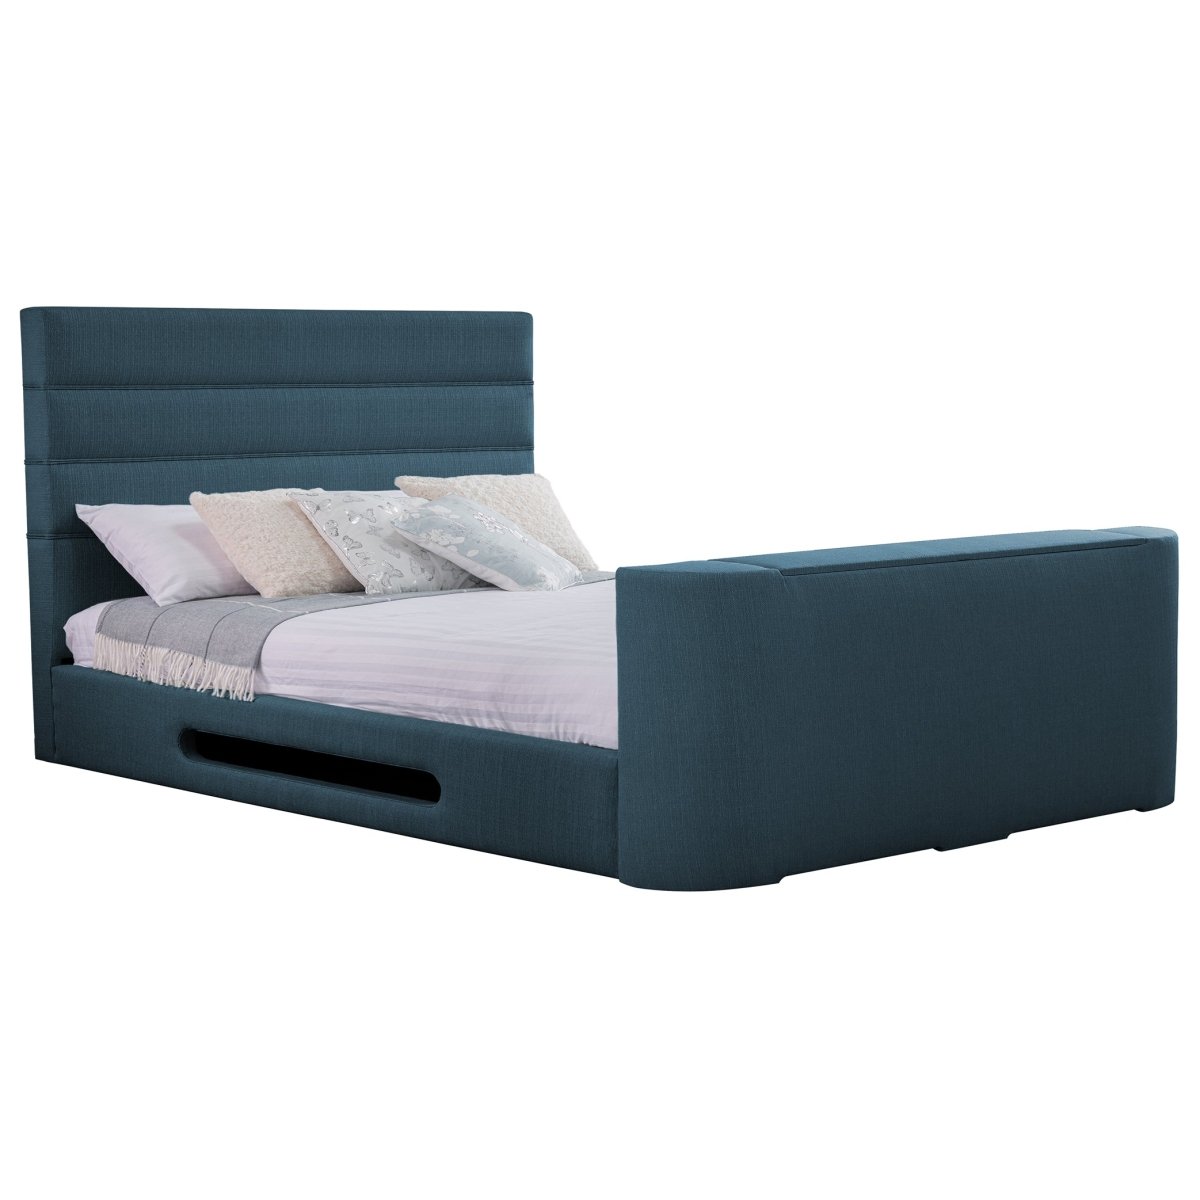 Mazarine Standard TV Bed frame - TV Beds Northwest - INMAZ-STD-135-CHATS GRANITE - choose your colour tvbed - doubletvbed